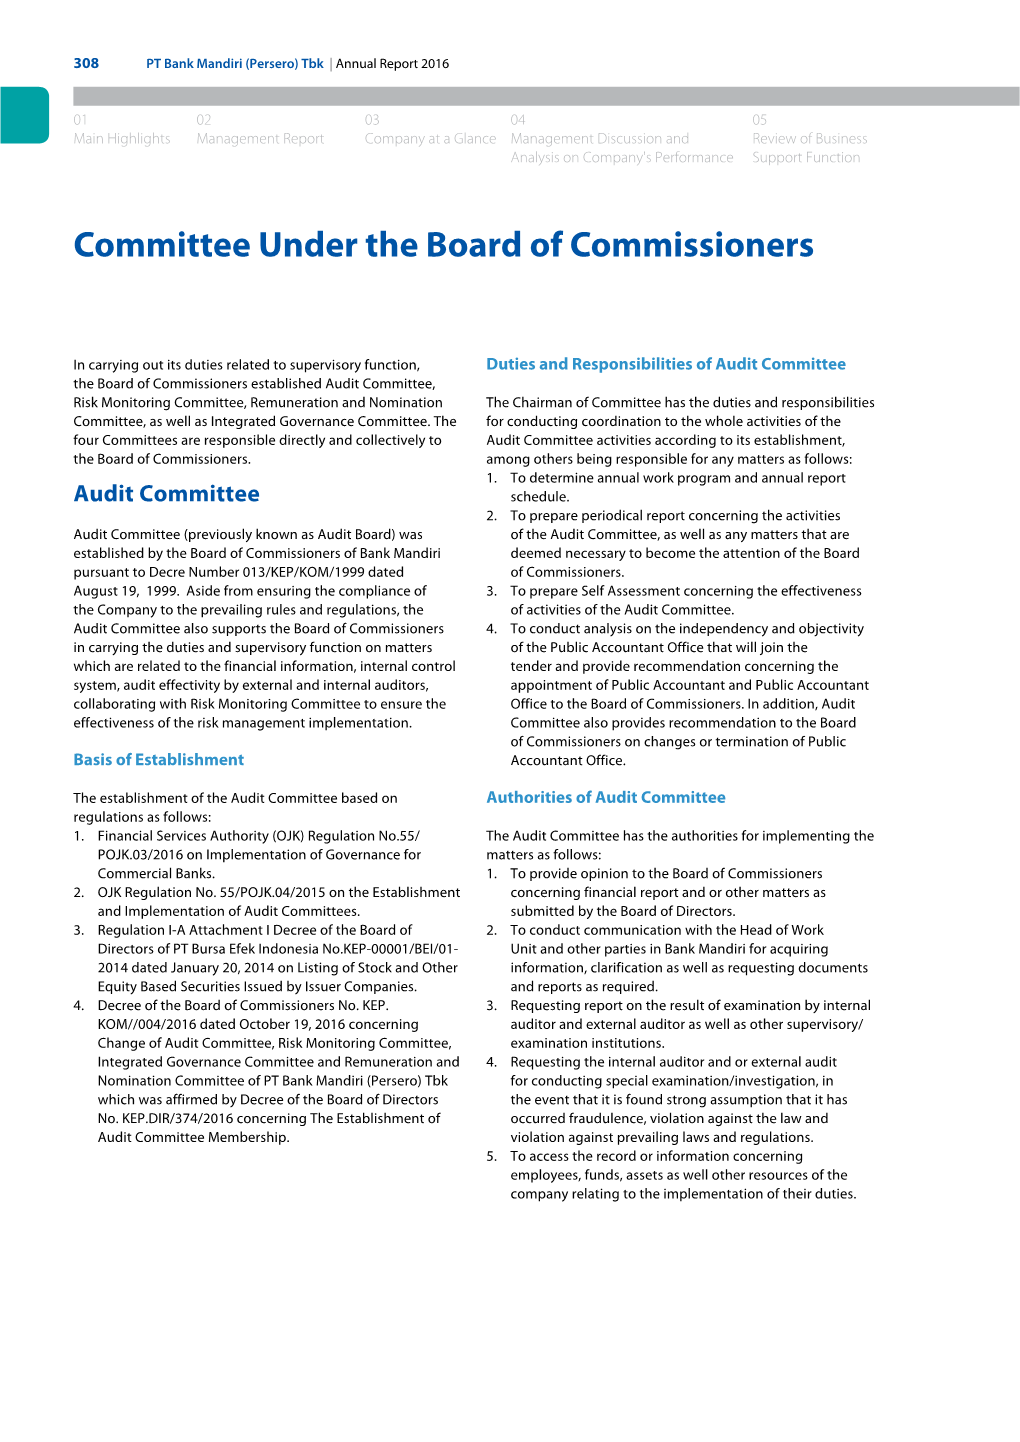 Committee Under the Board of Commissioners